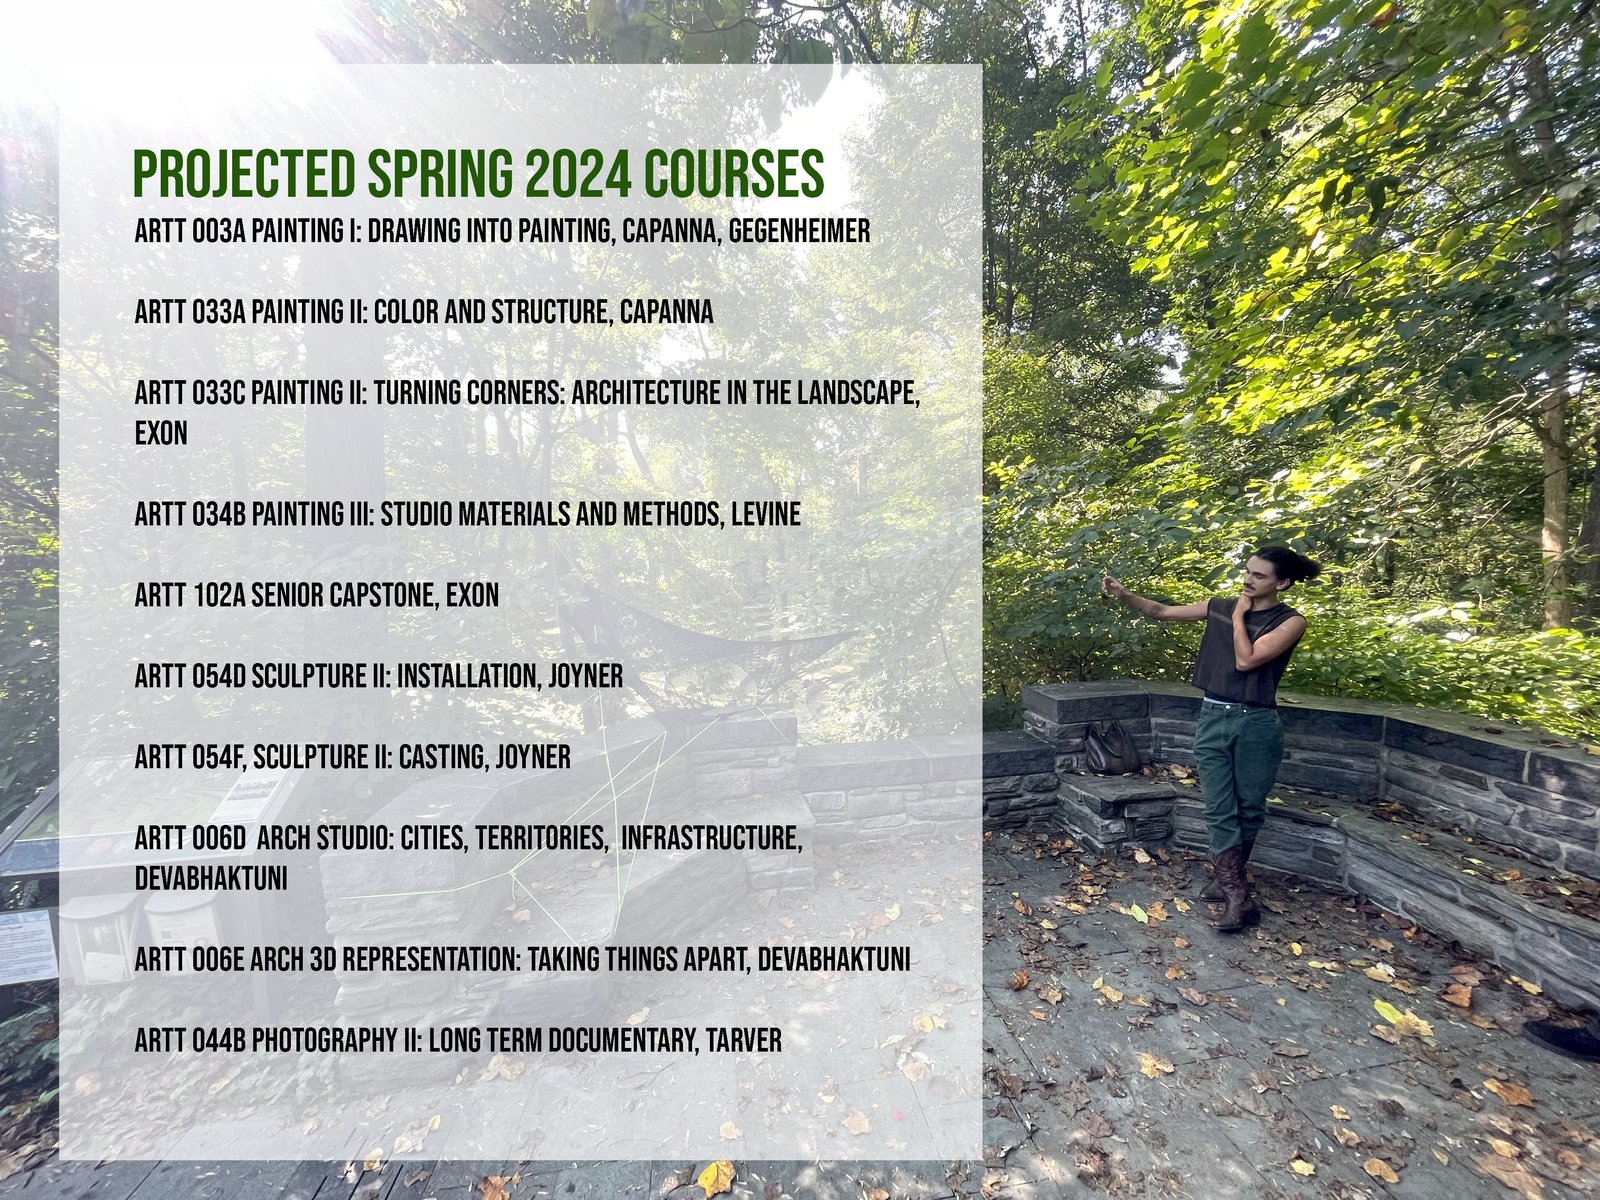 Projected art course listing for the Spring 2024 semester